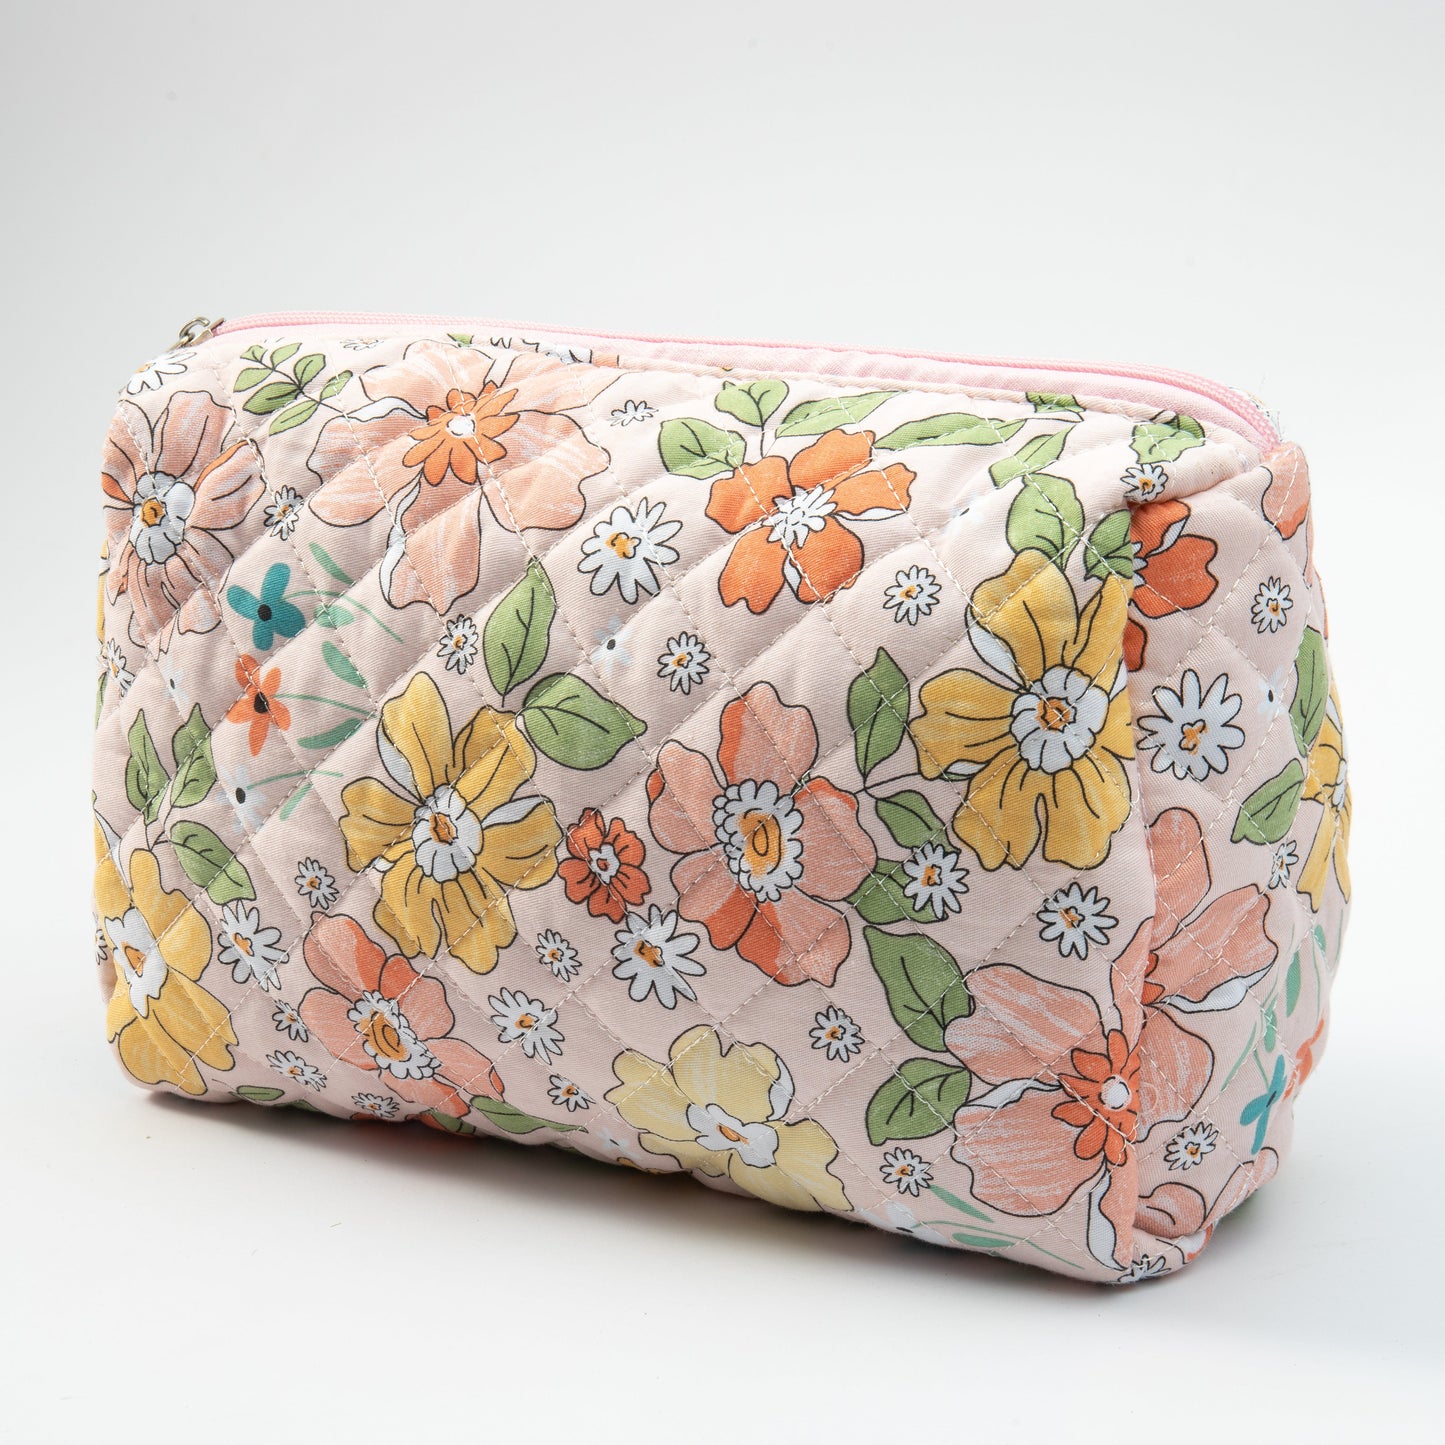 Small Cosmetic Bag With Floral Quilted Makeup Pouch - Travel Toiletry Organizer